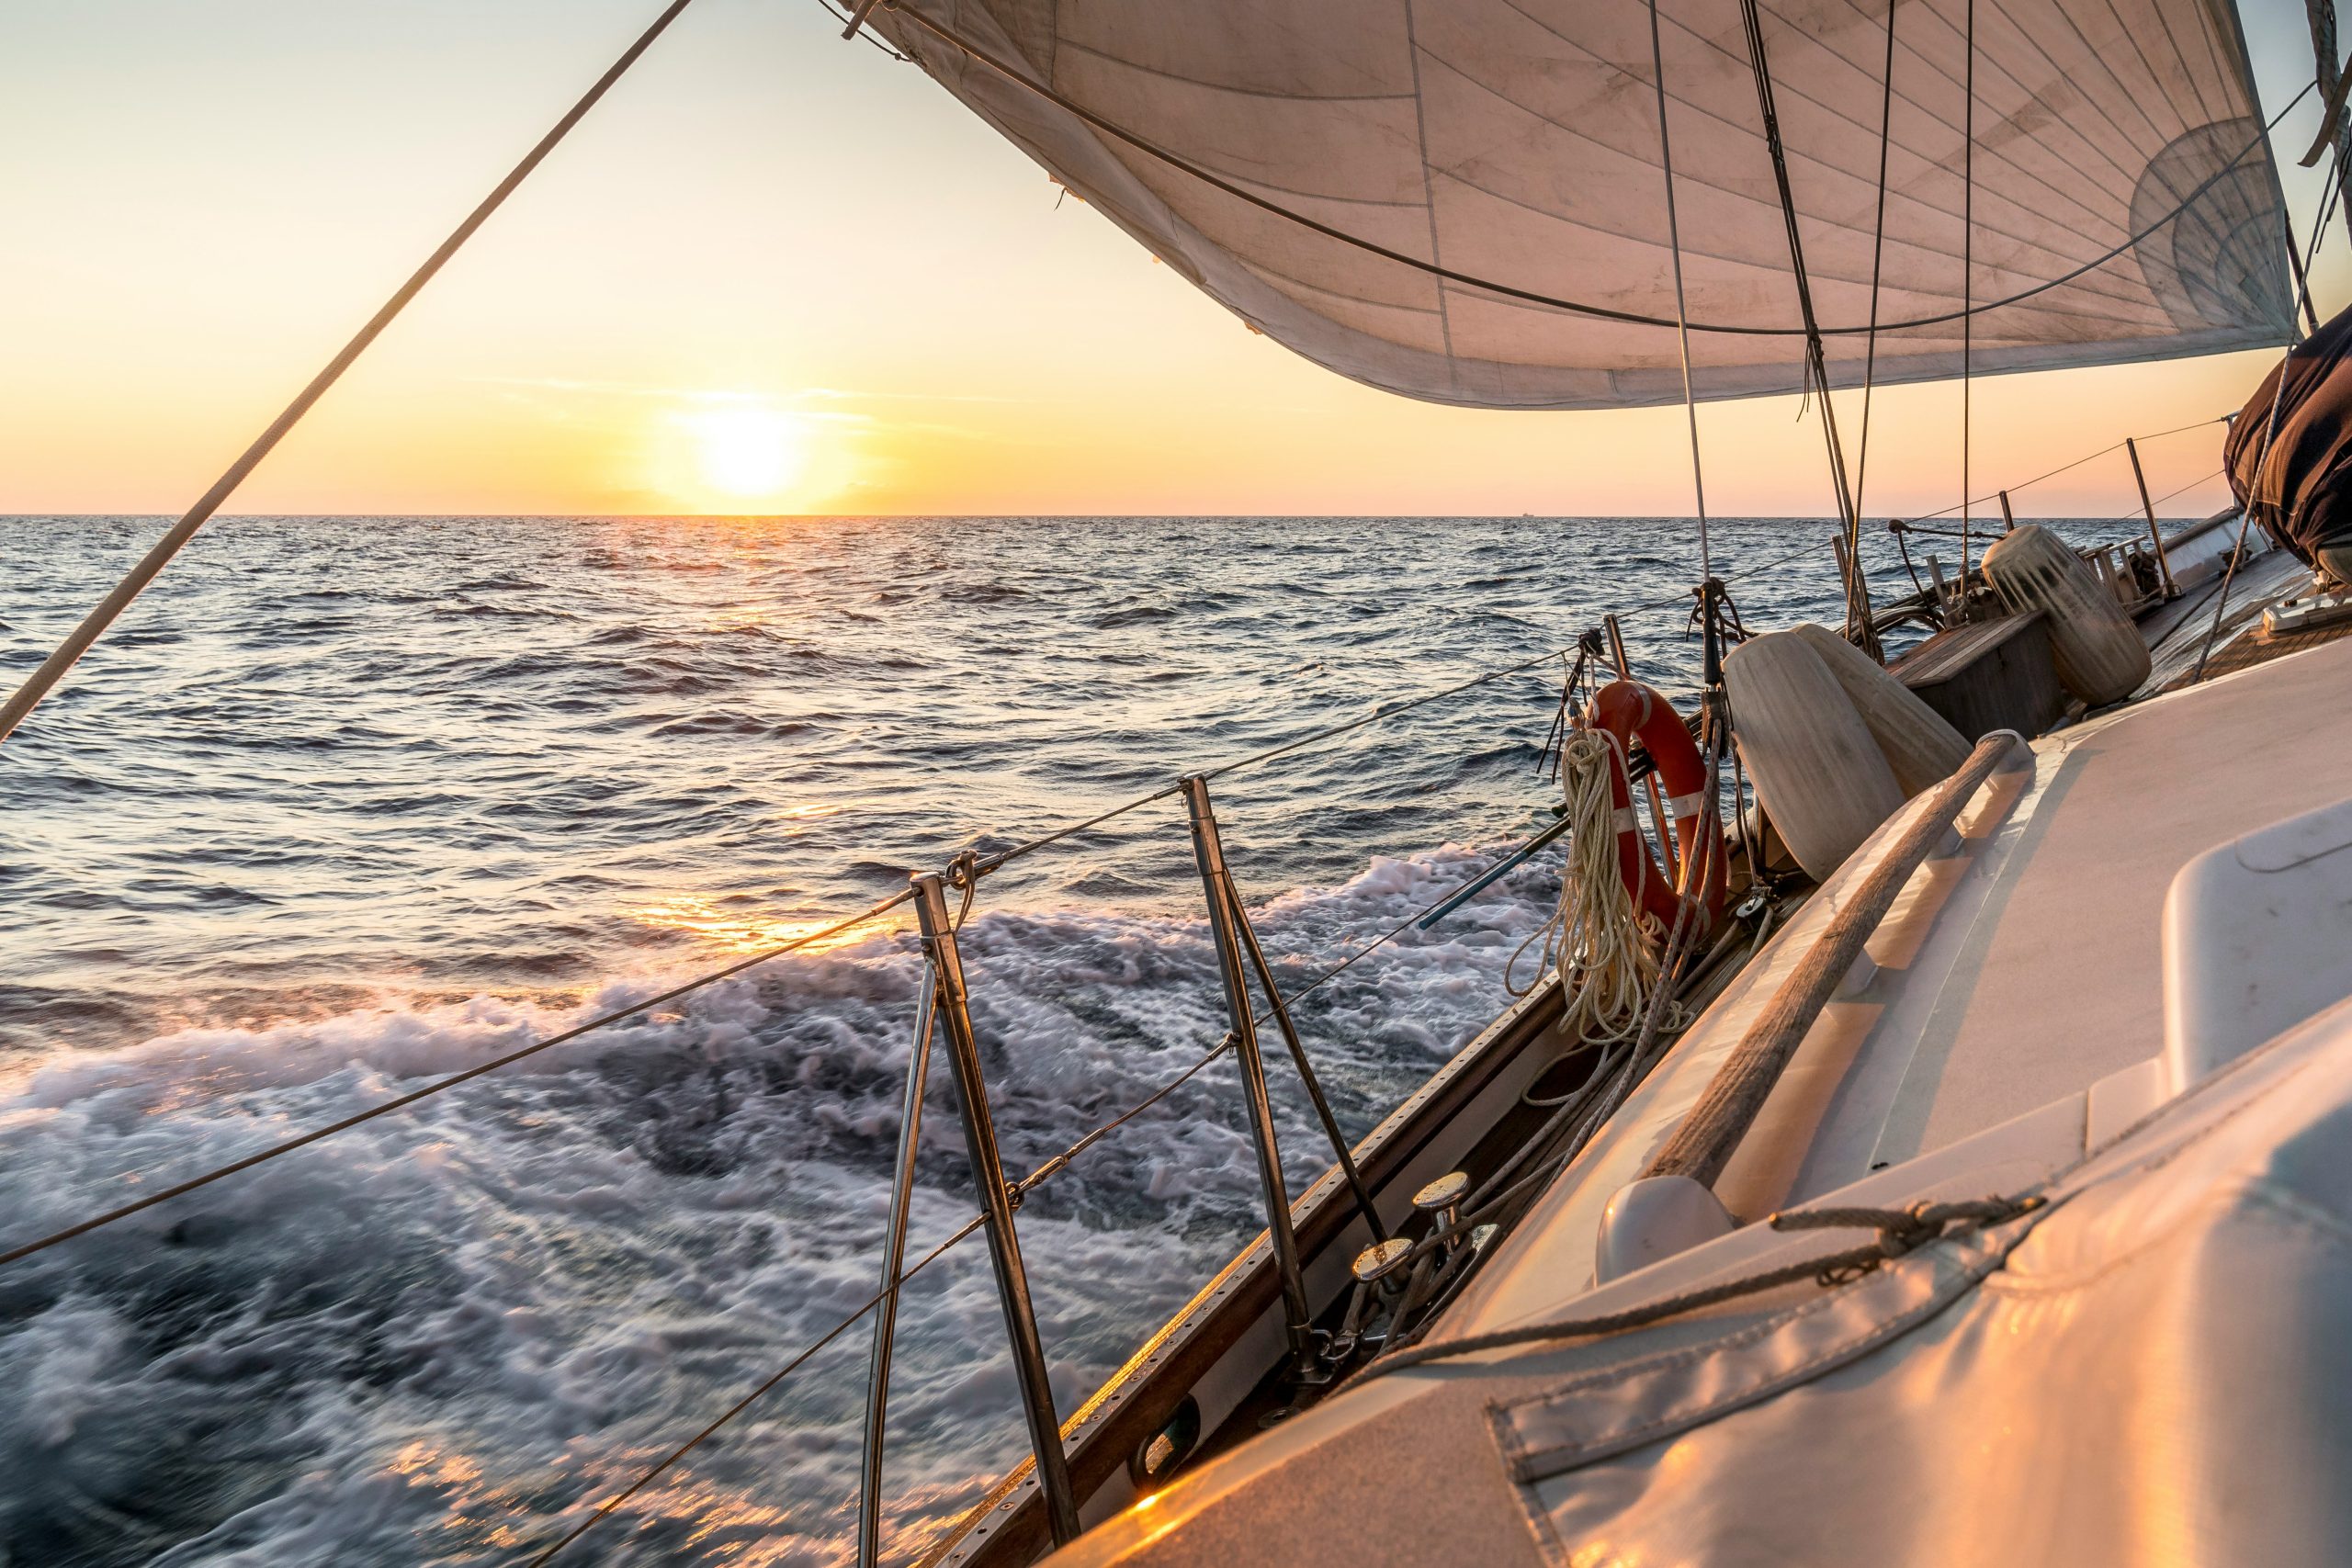 explore the thrilling world of sailing with our expert guides and discover the joy of navigating the open seas.